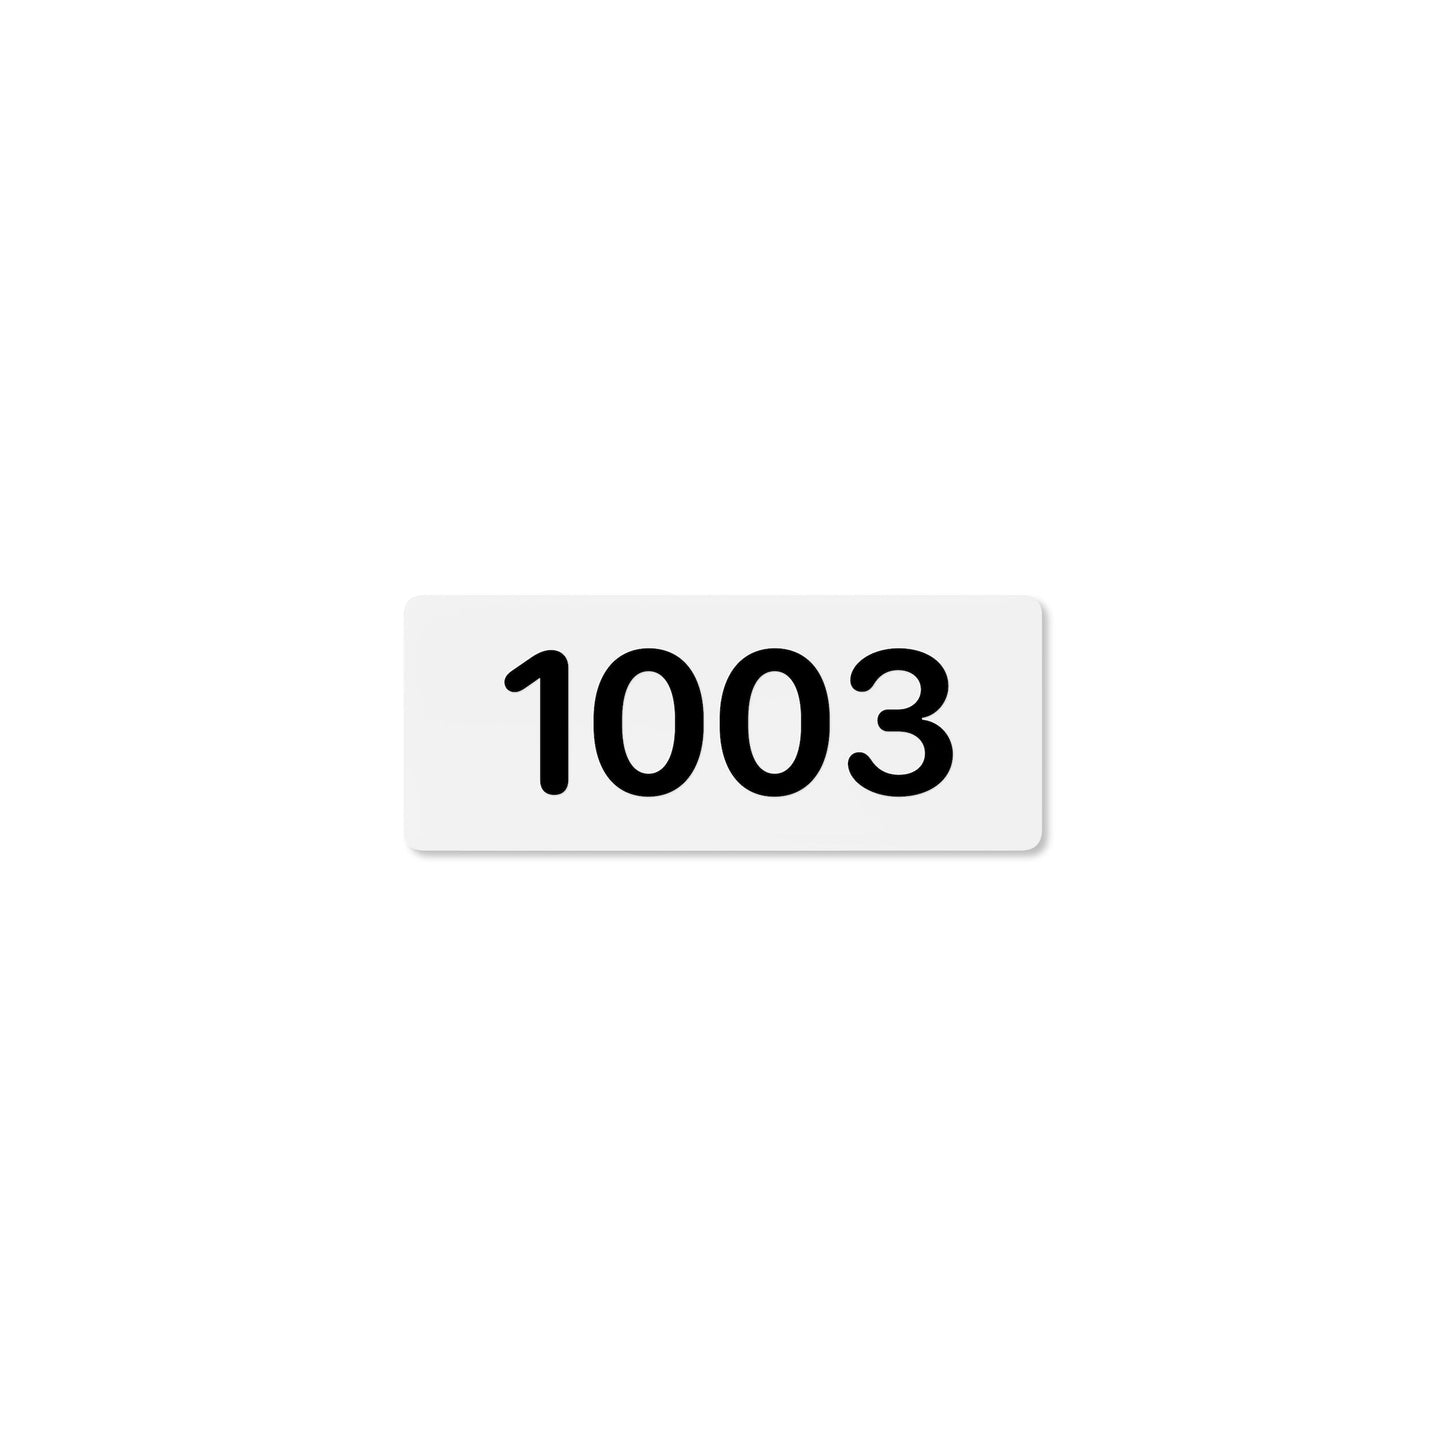 Numeral 1003